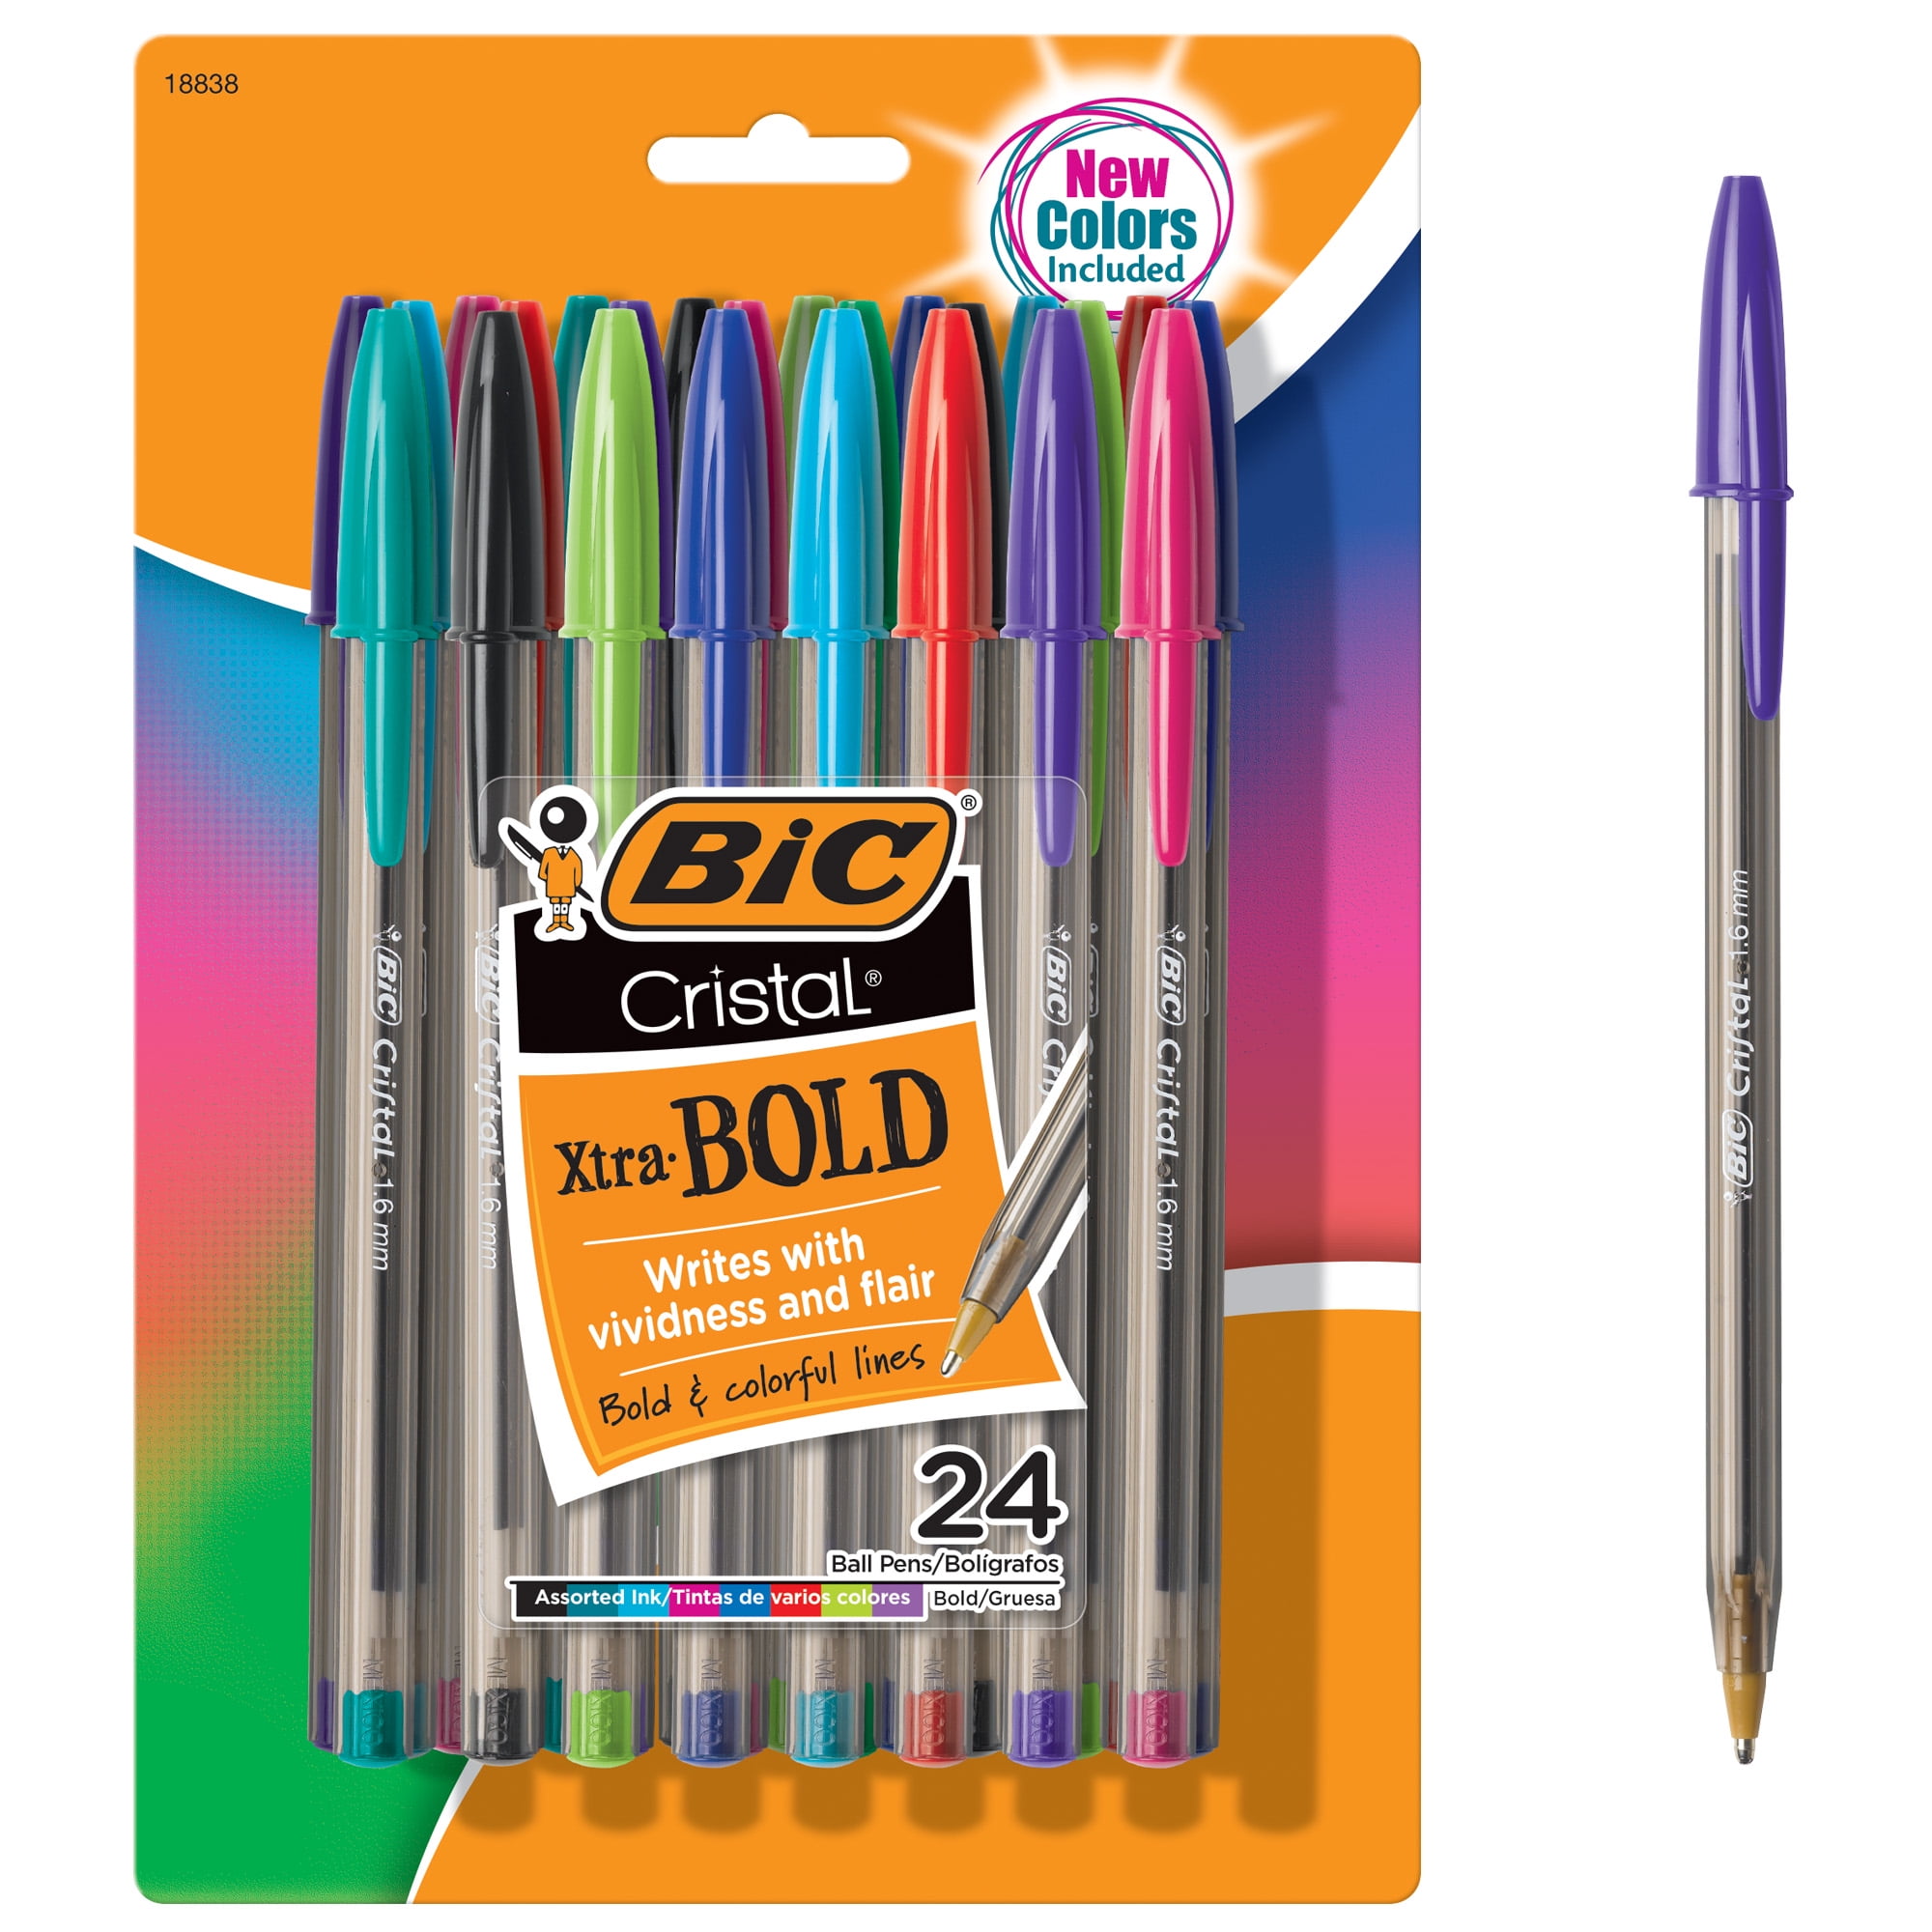 Pack of 10 in Bag of 10 BIC Cristal Ballpoint Pen Large Multicoloured